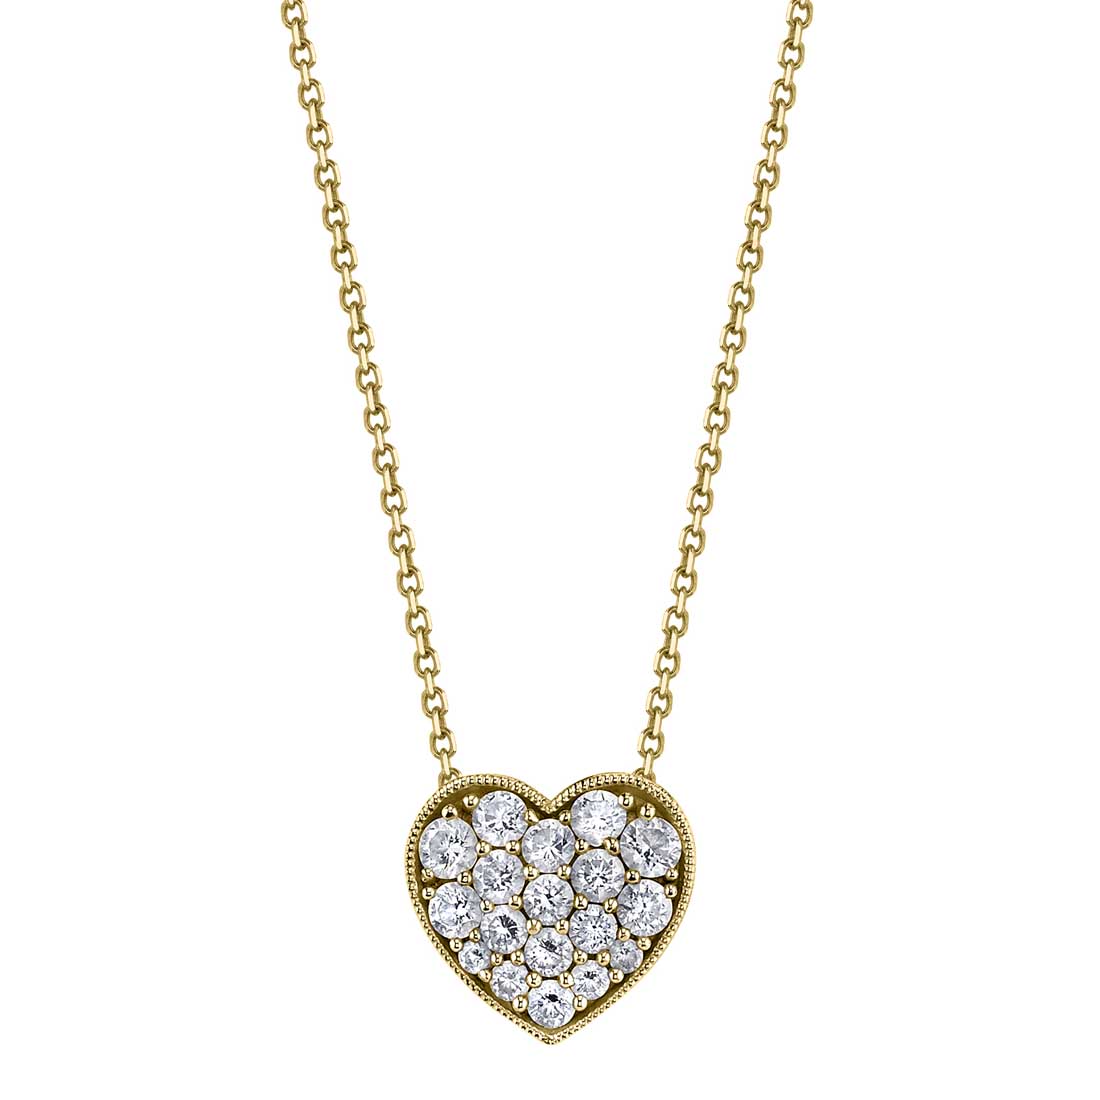 Heartaped Diamond Necklace in Yellow Gold